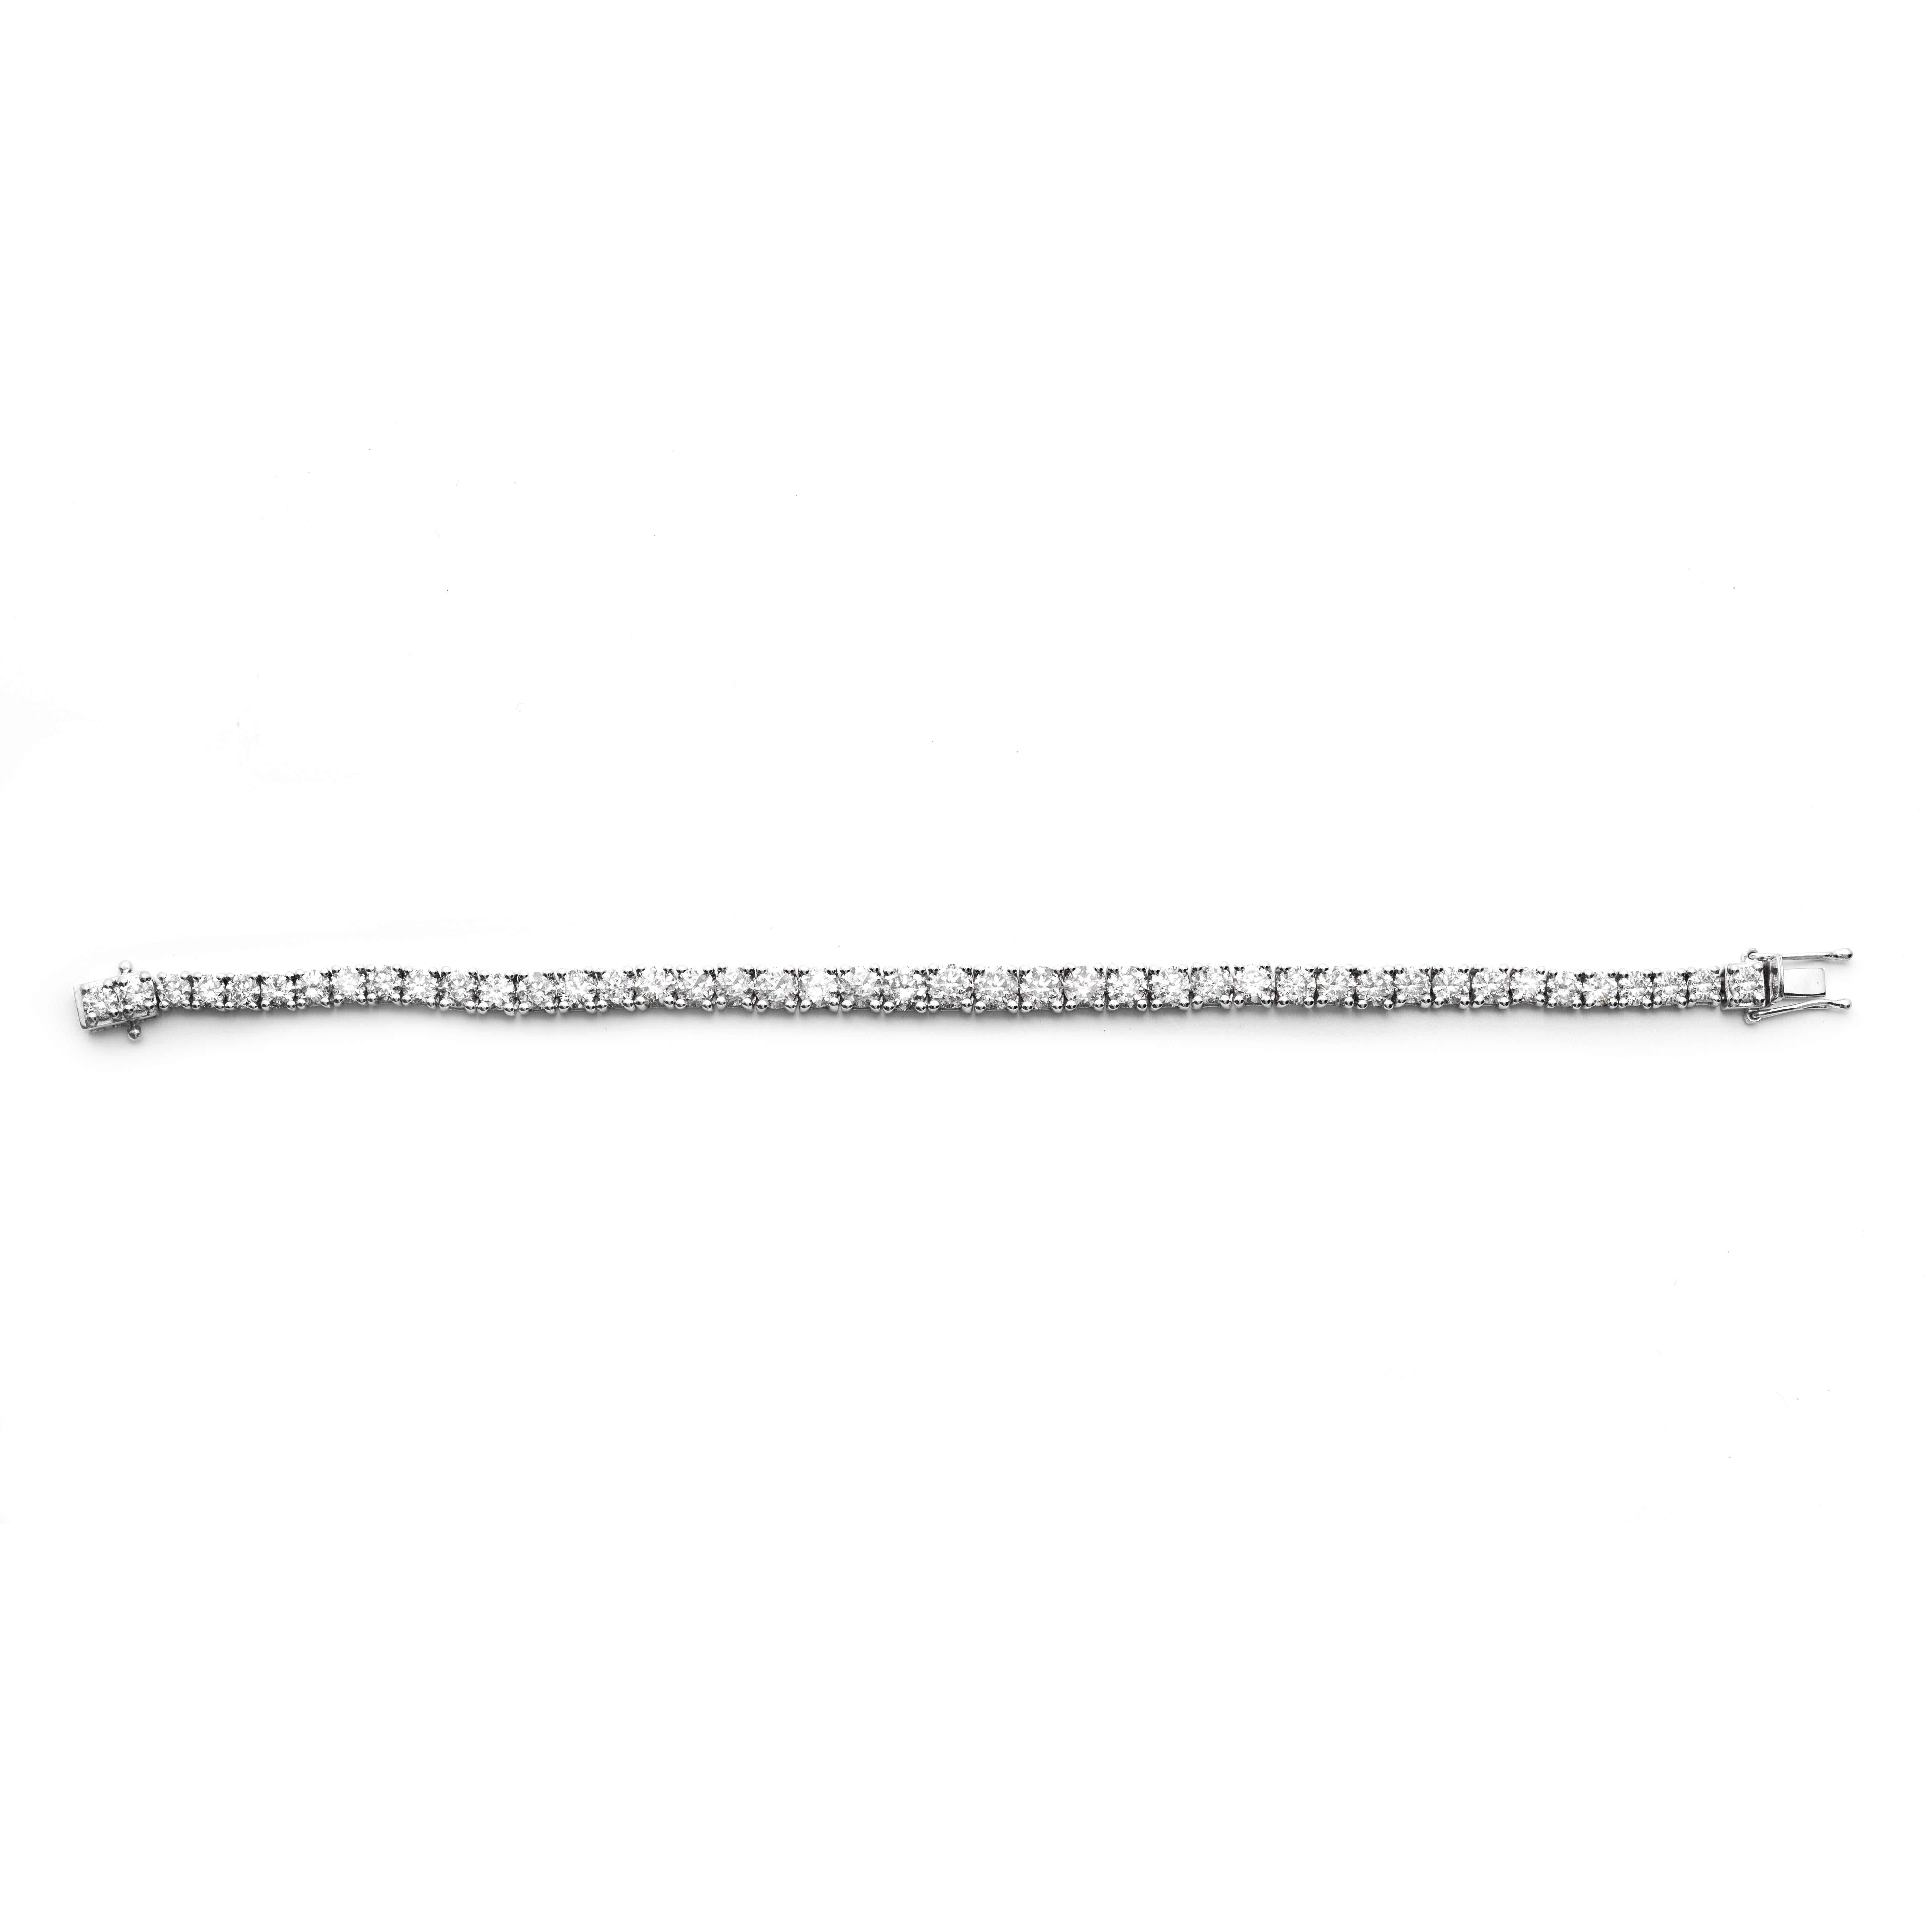 Diamond Bracelet
The tennis bracelet set with forty-three round brilliant-cut diamonds together weighing approximately 11.91 carats, mounted in Platinum, length approximately 7 inches, 29.70 grams (gross)
Accompanied with AIG